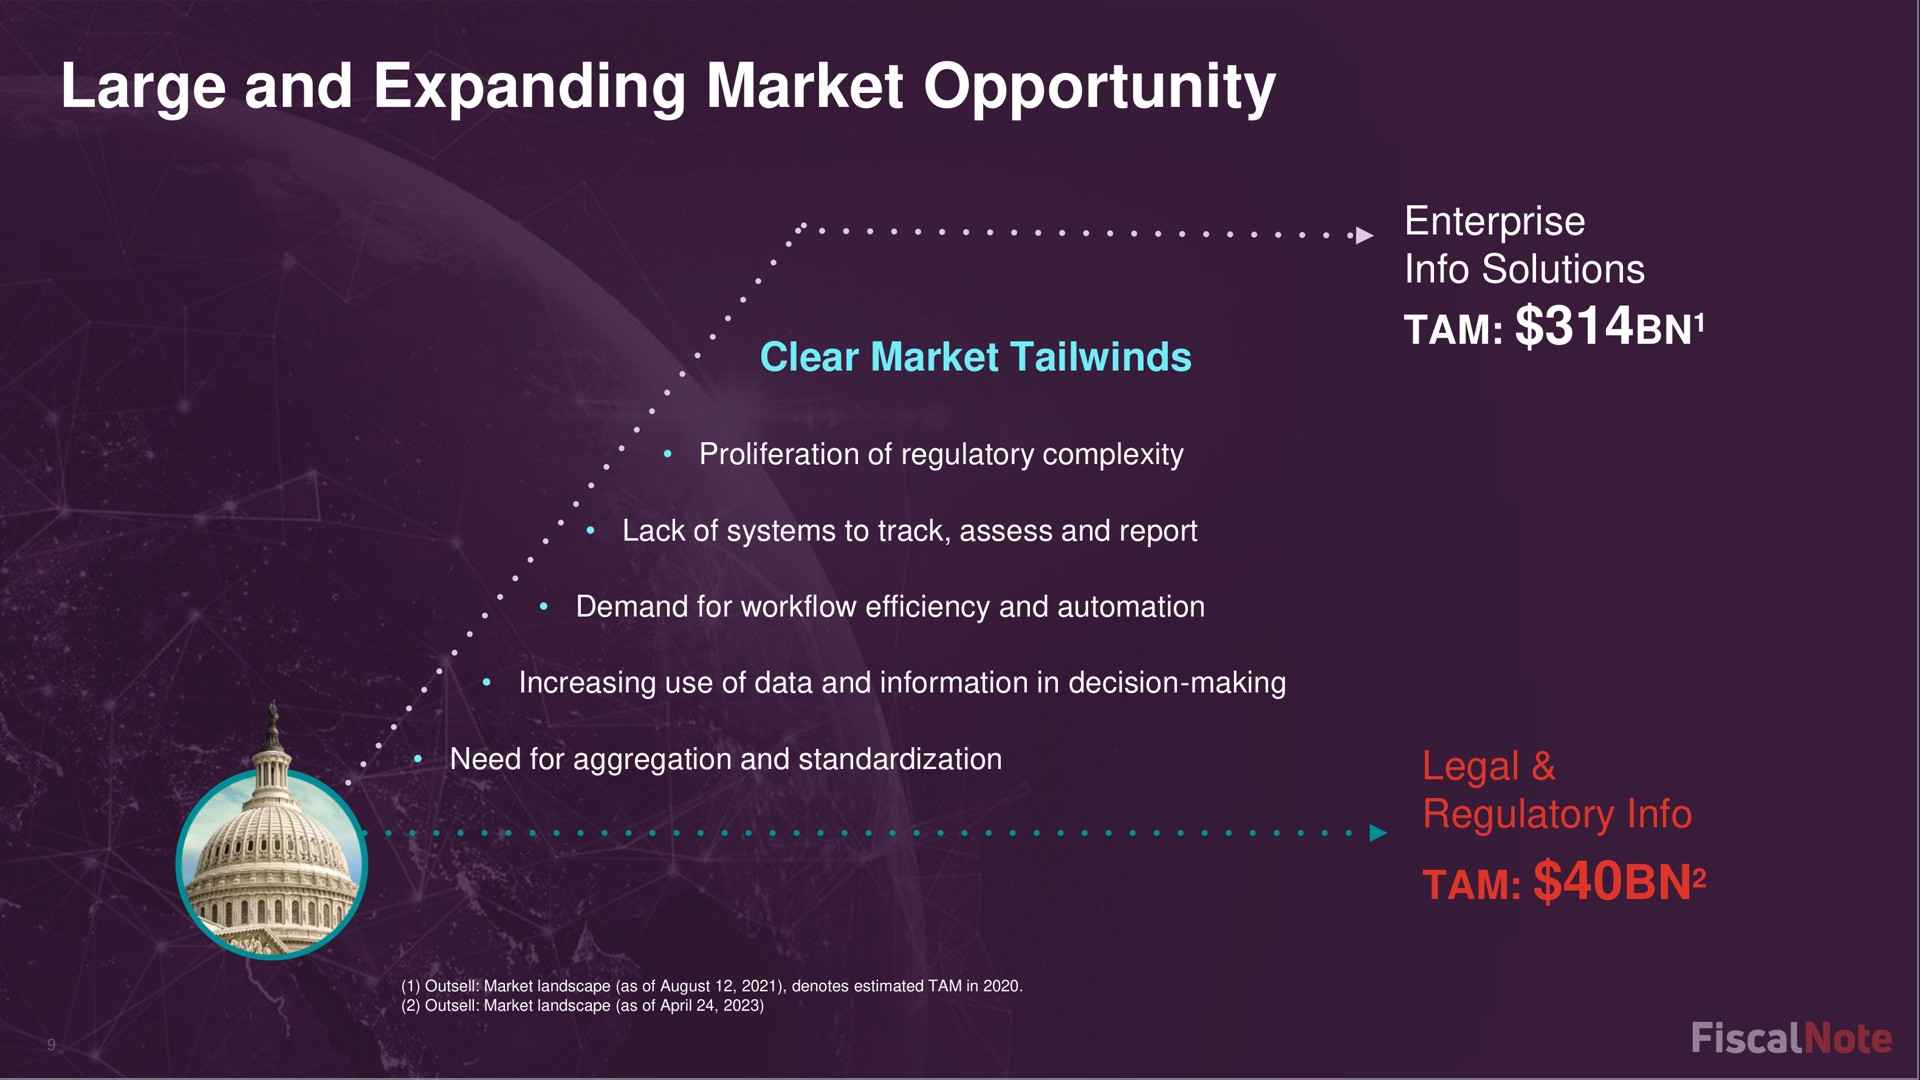 large and expanding market opportunity clear market enterprise solutions tam legal regulatory tam fiscal | FiscalNote